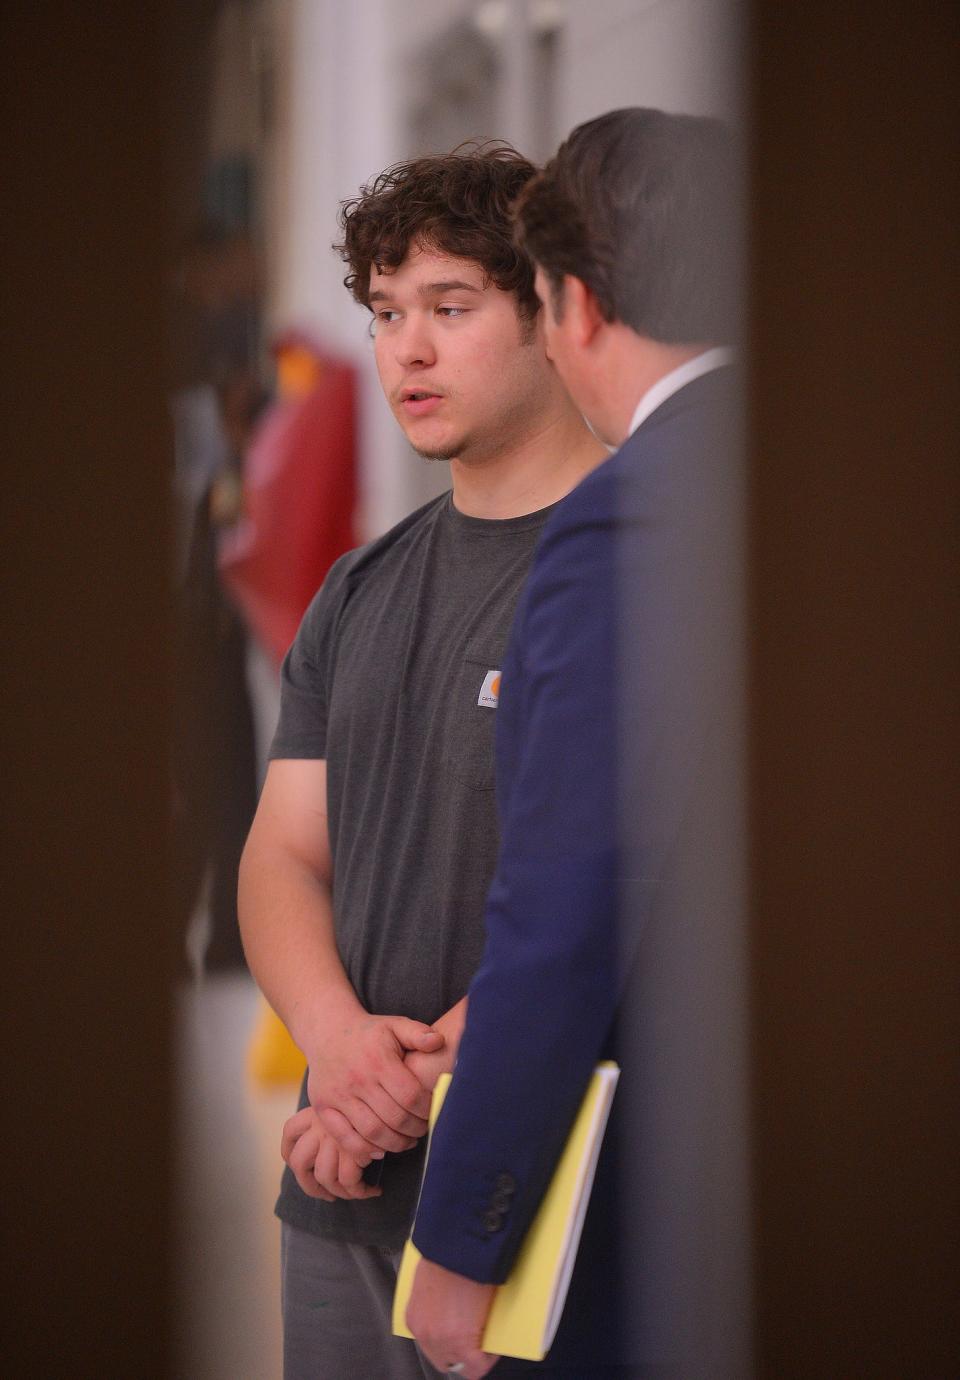 A new bond hearing was held Thursday for former American Idol contestant Caleb Kennedy, shown here during a magistrate court session in Spartanburg, Wednesday morning, February 9, 2022. Kennedy, 17, is charged with felony DUI resulting in the death of Larry Parris, 54, at his home near Pacolet Feb. 8.